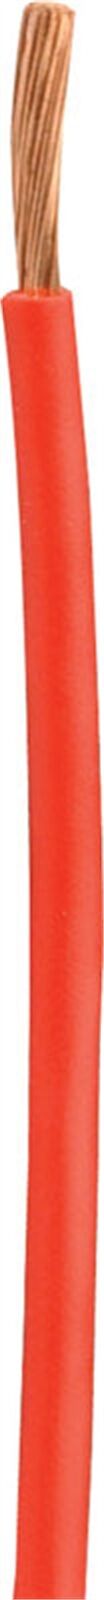 Coleman Cable 55672123 Red 10 AWG PVC Copper Primary Wire 100 ft. Bulk Spool